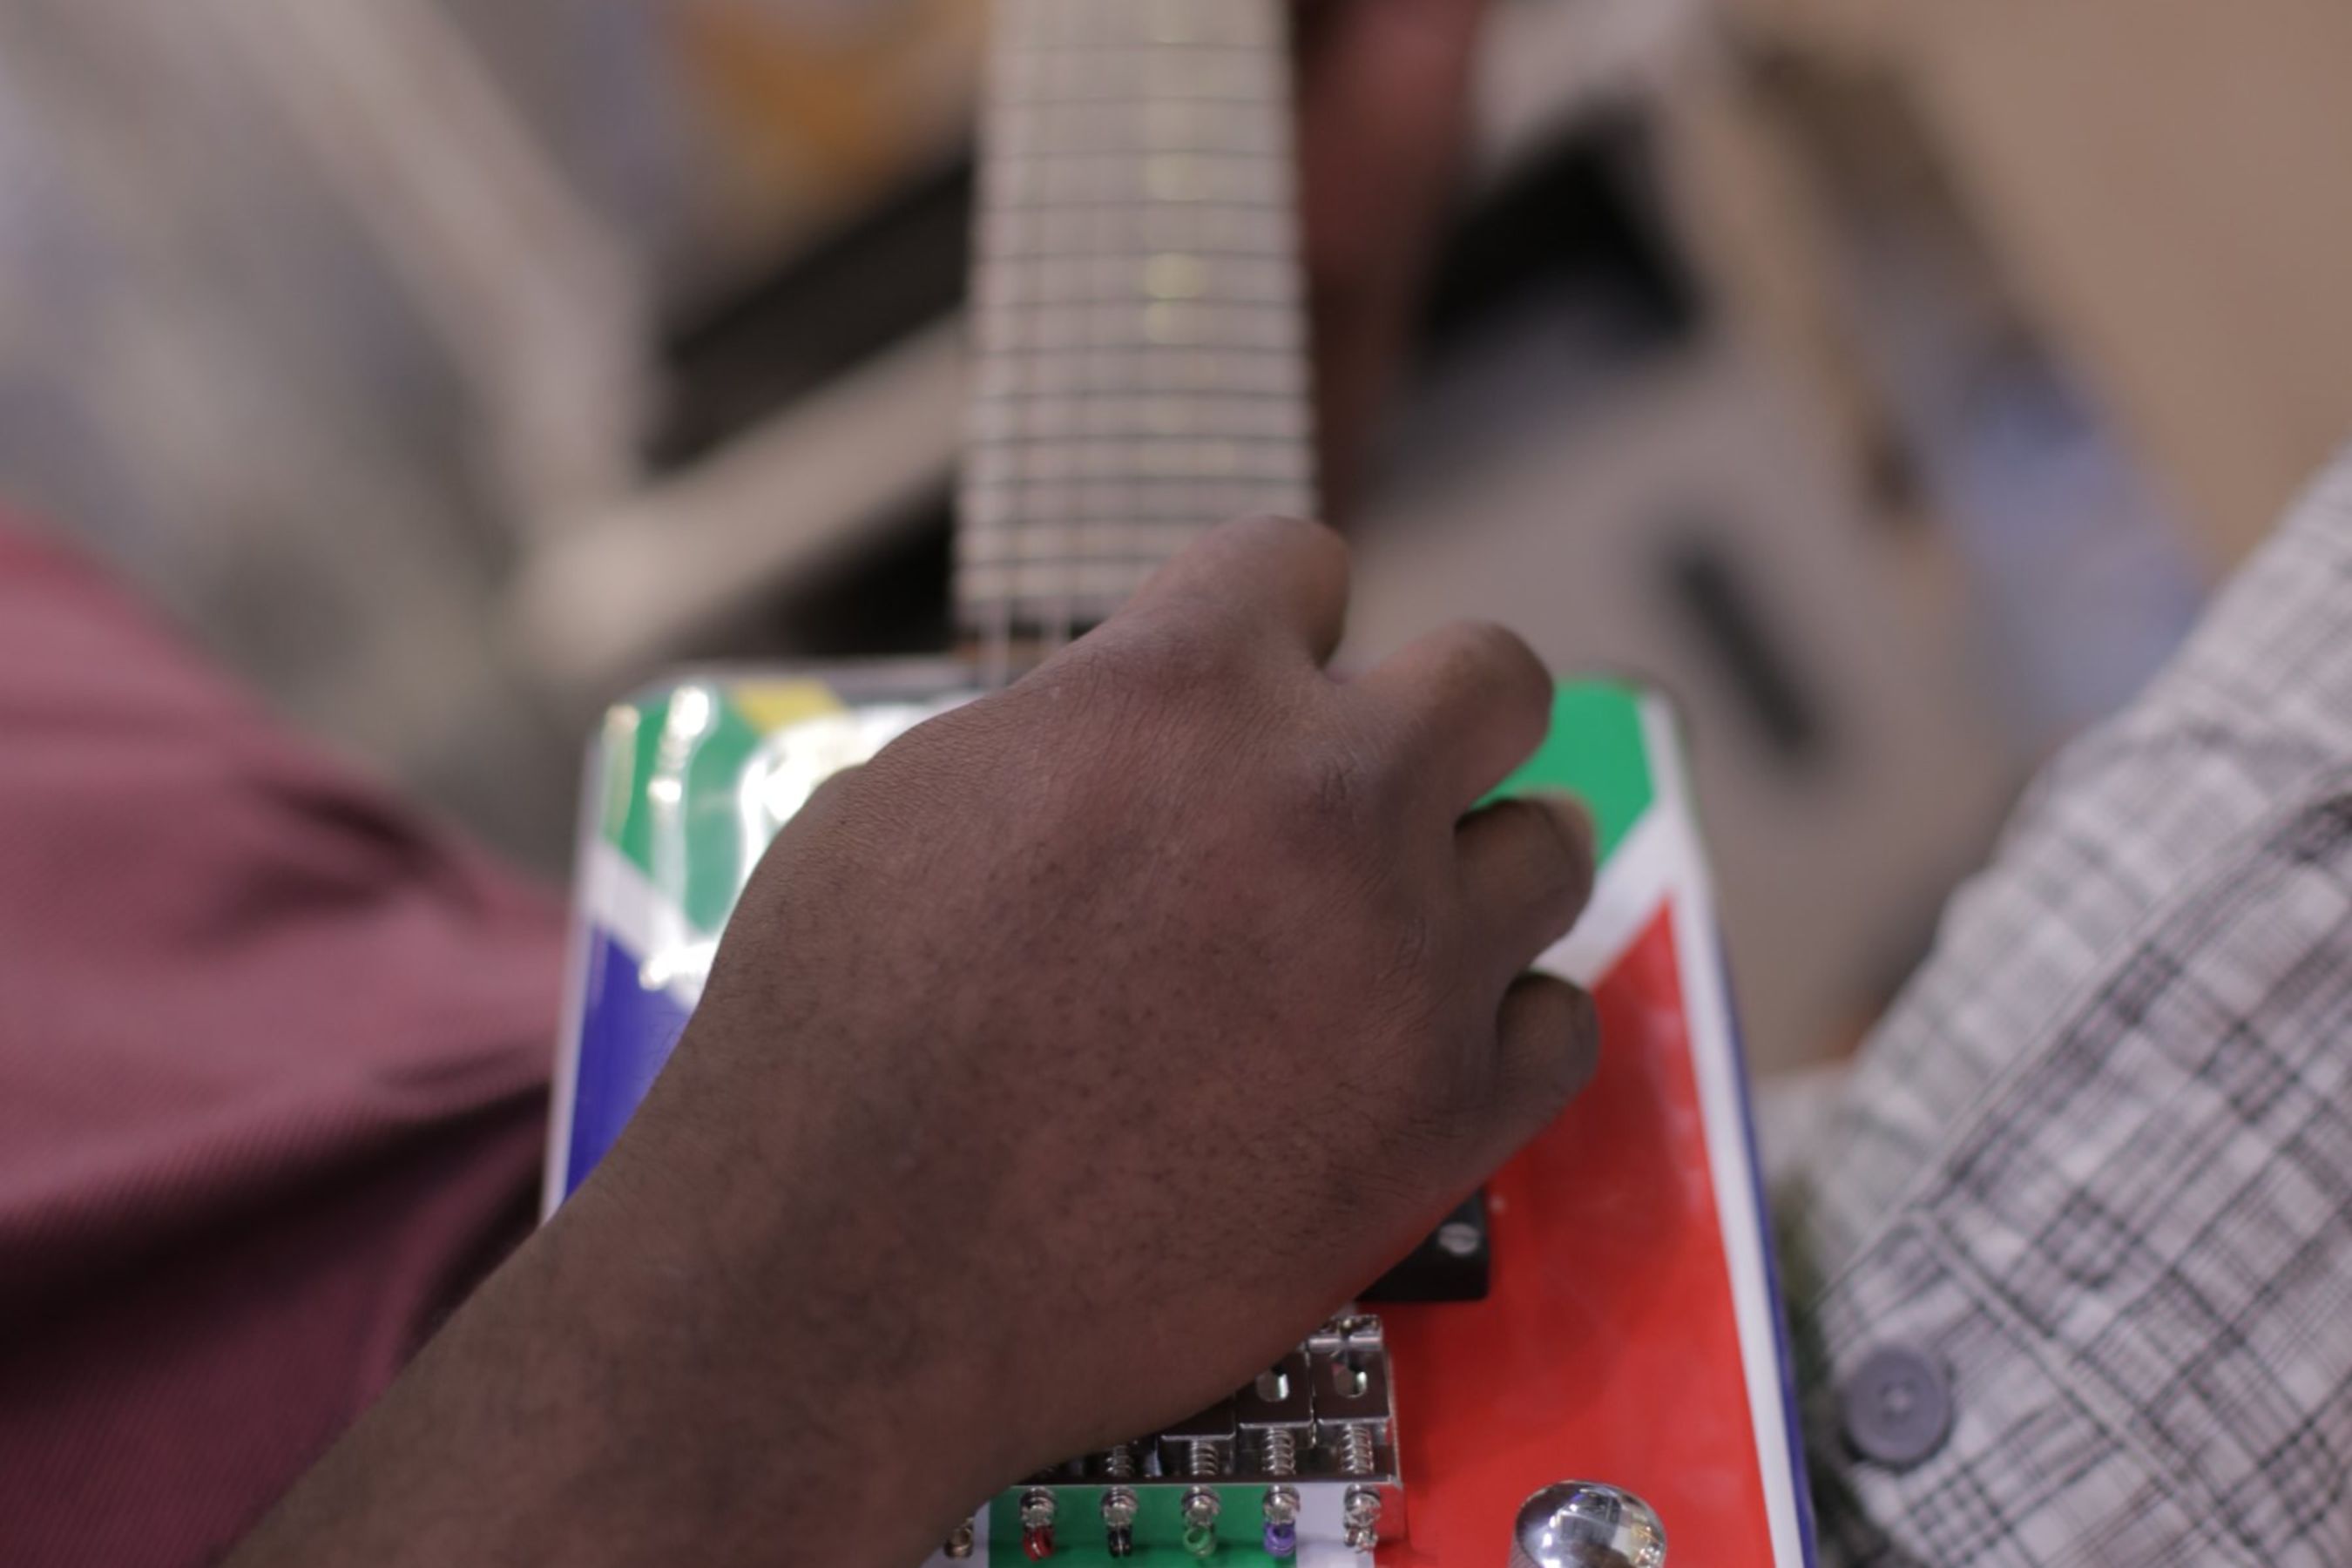 $600 guitars made oil cans: The authentic Afri-can sound | CNN